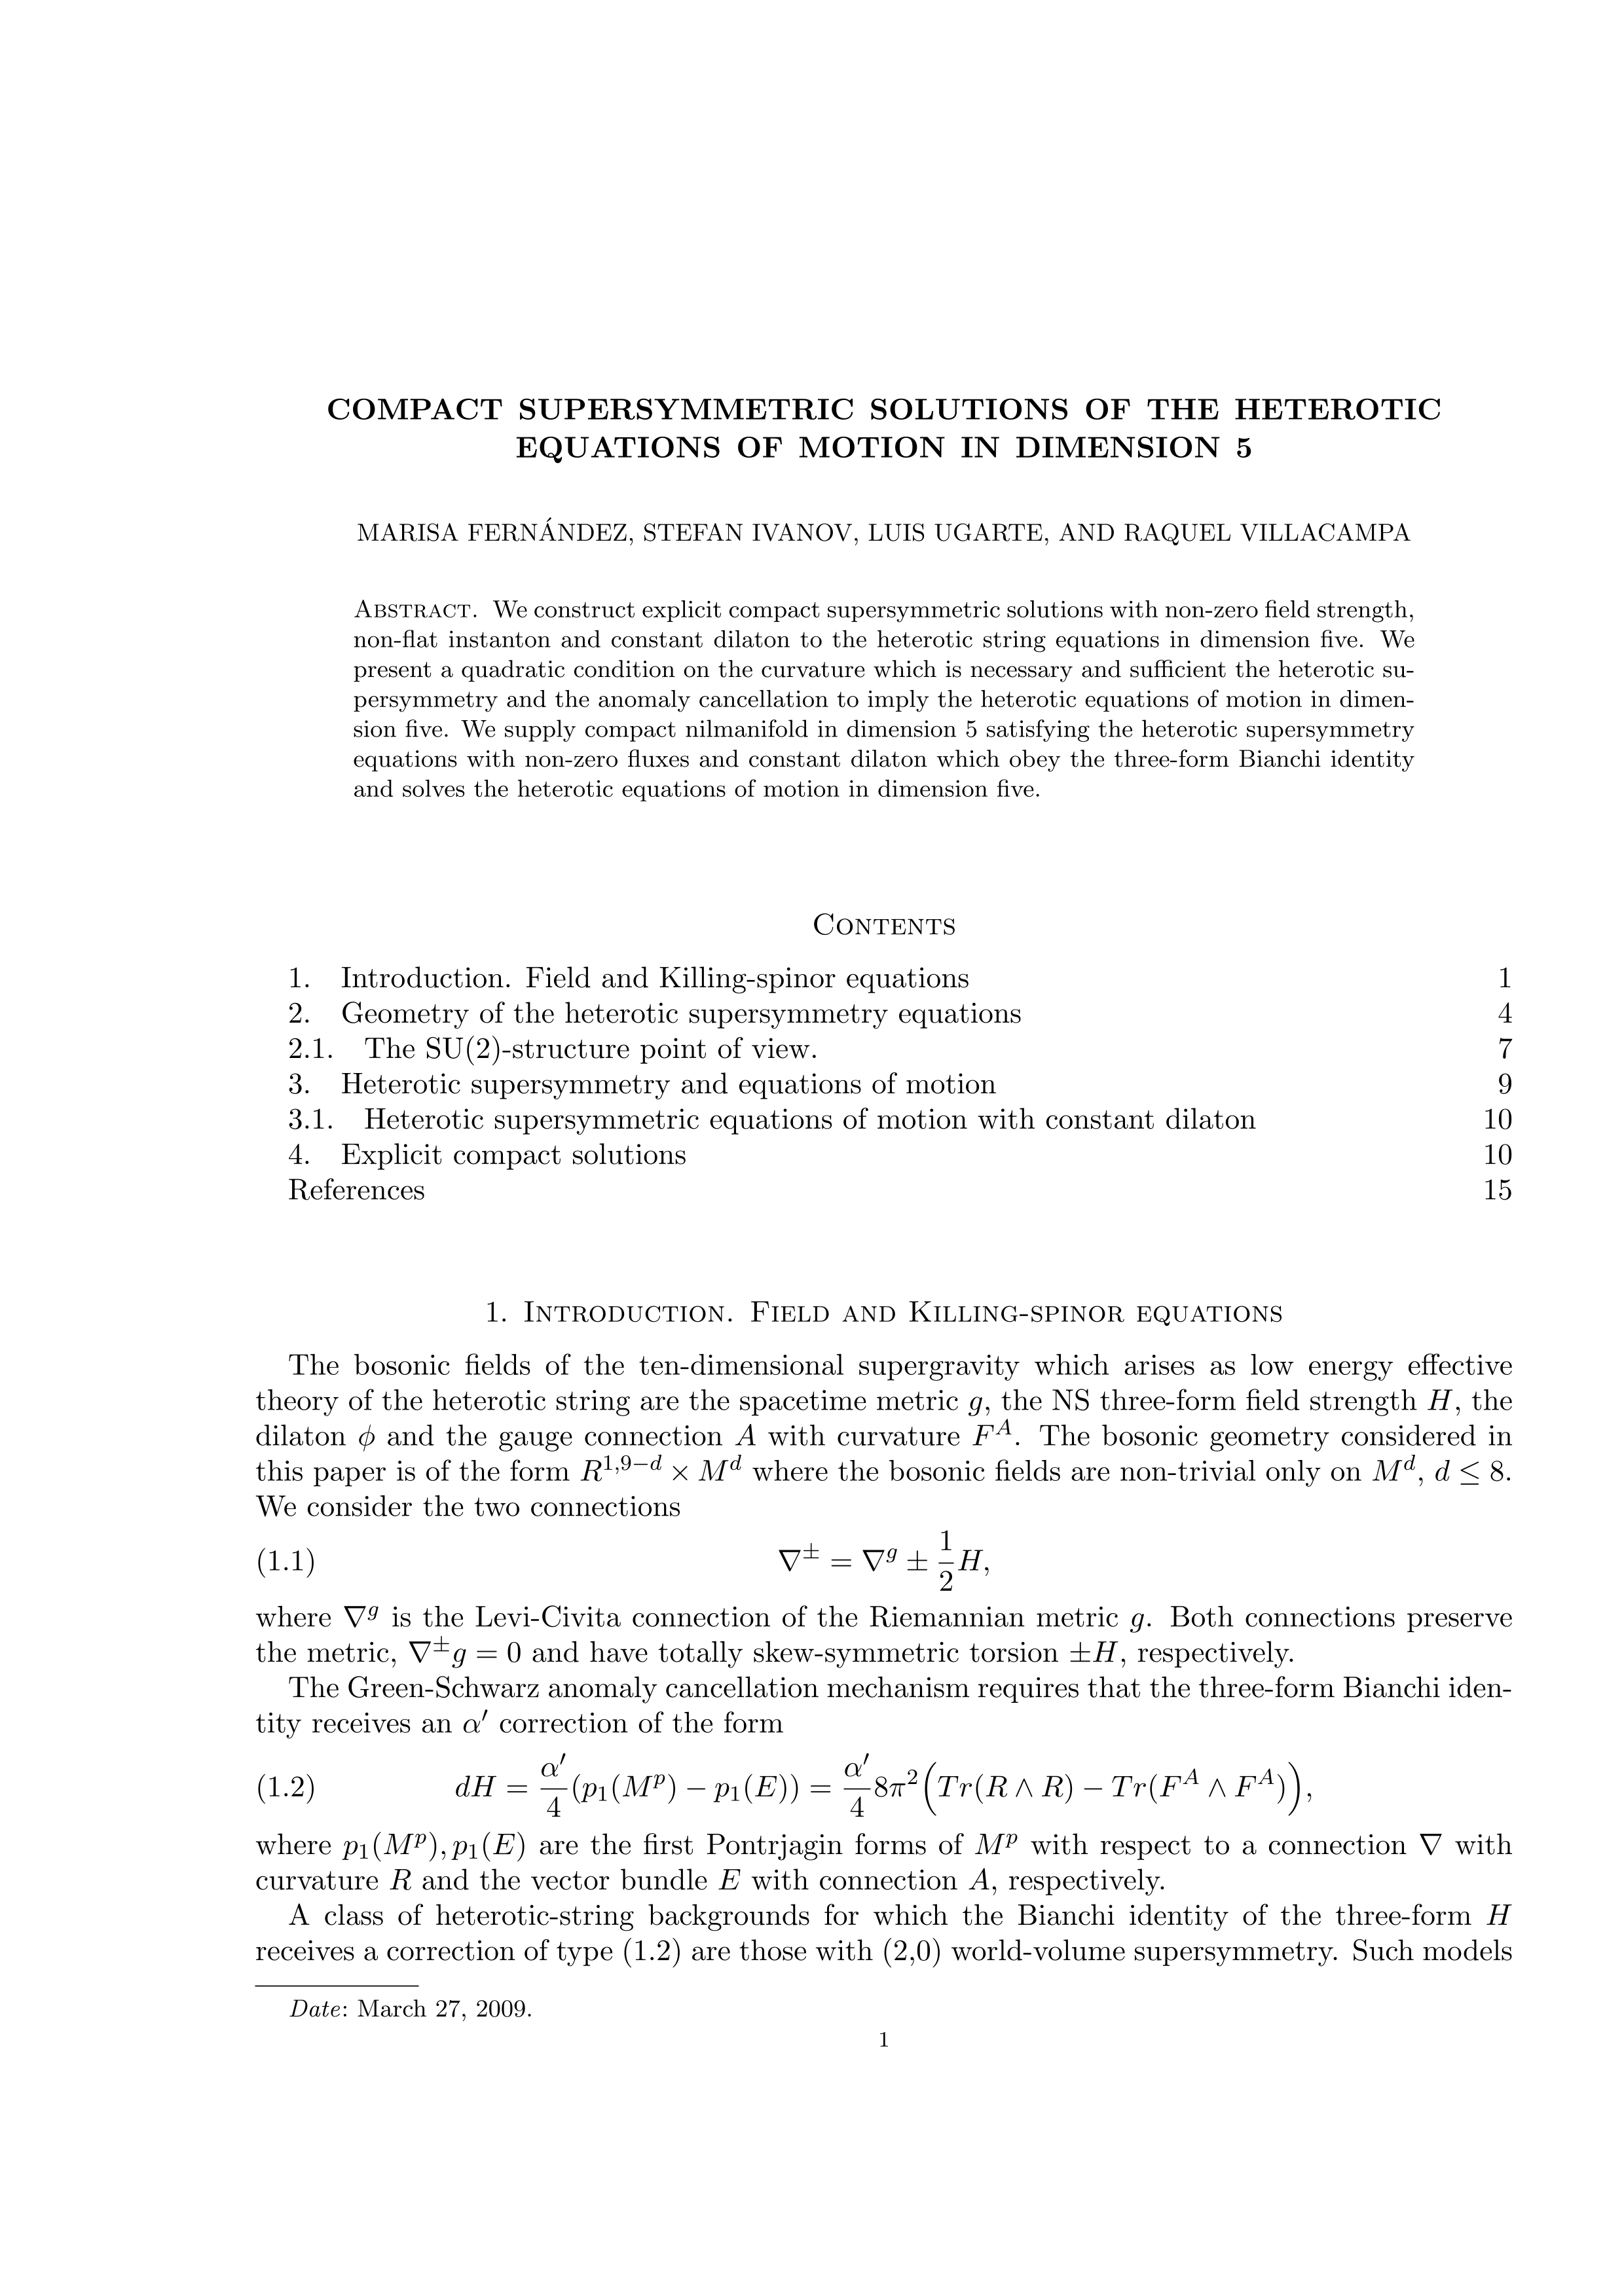 Compact Supersymmetric Solutions of the Heterotic Equations of Motion in Dimension 5